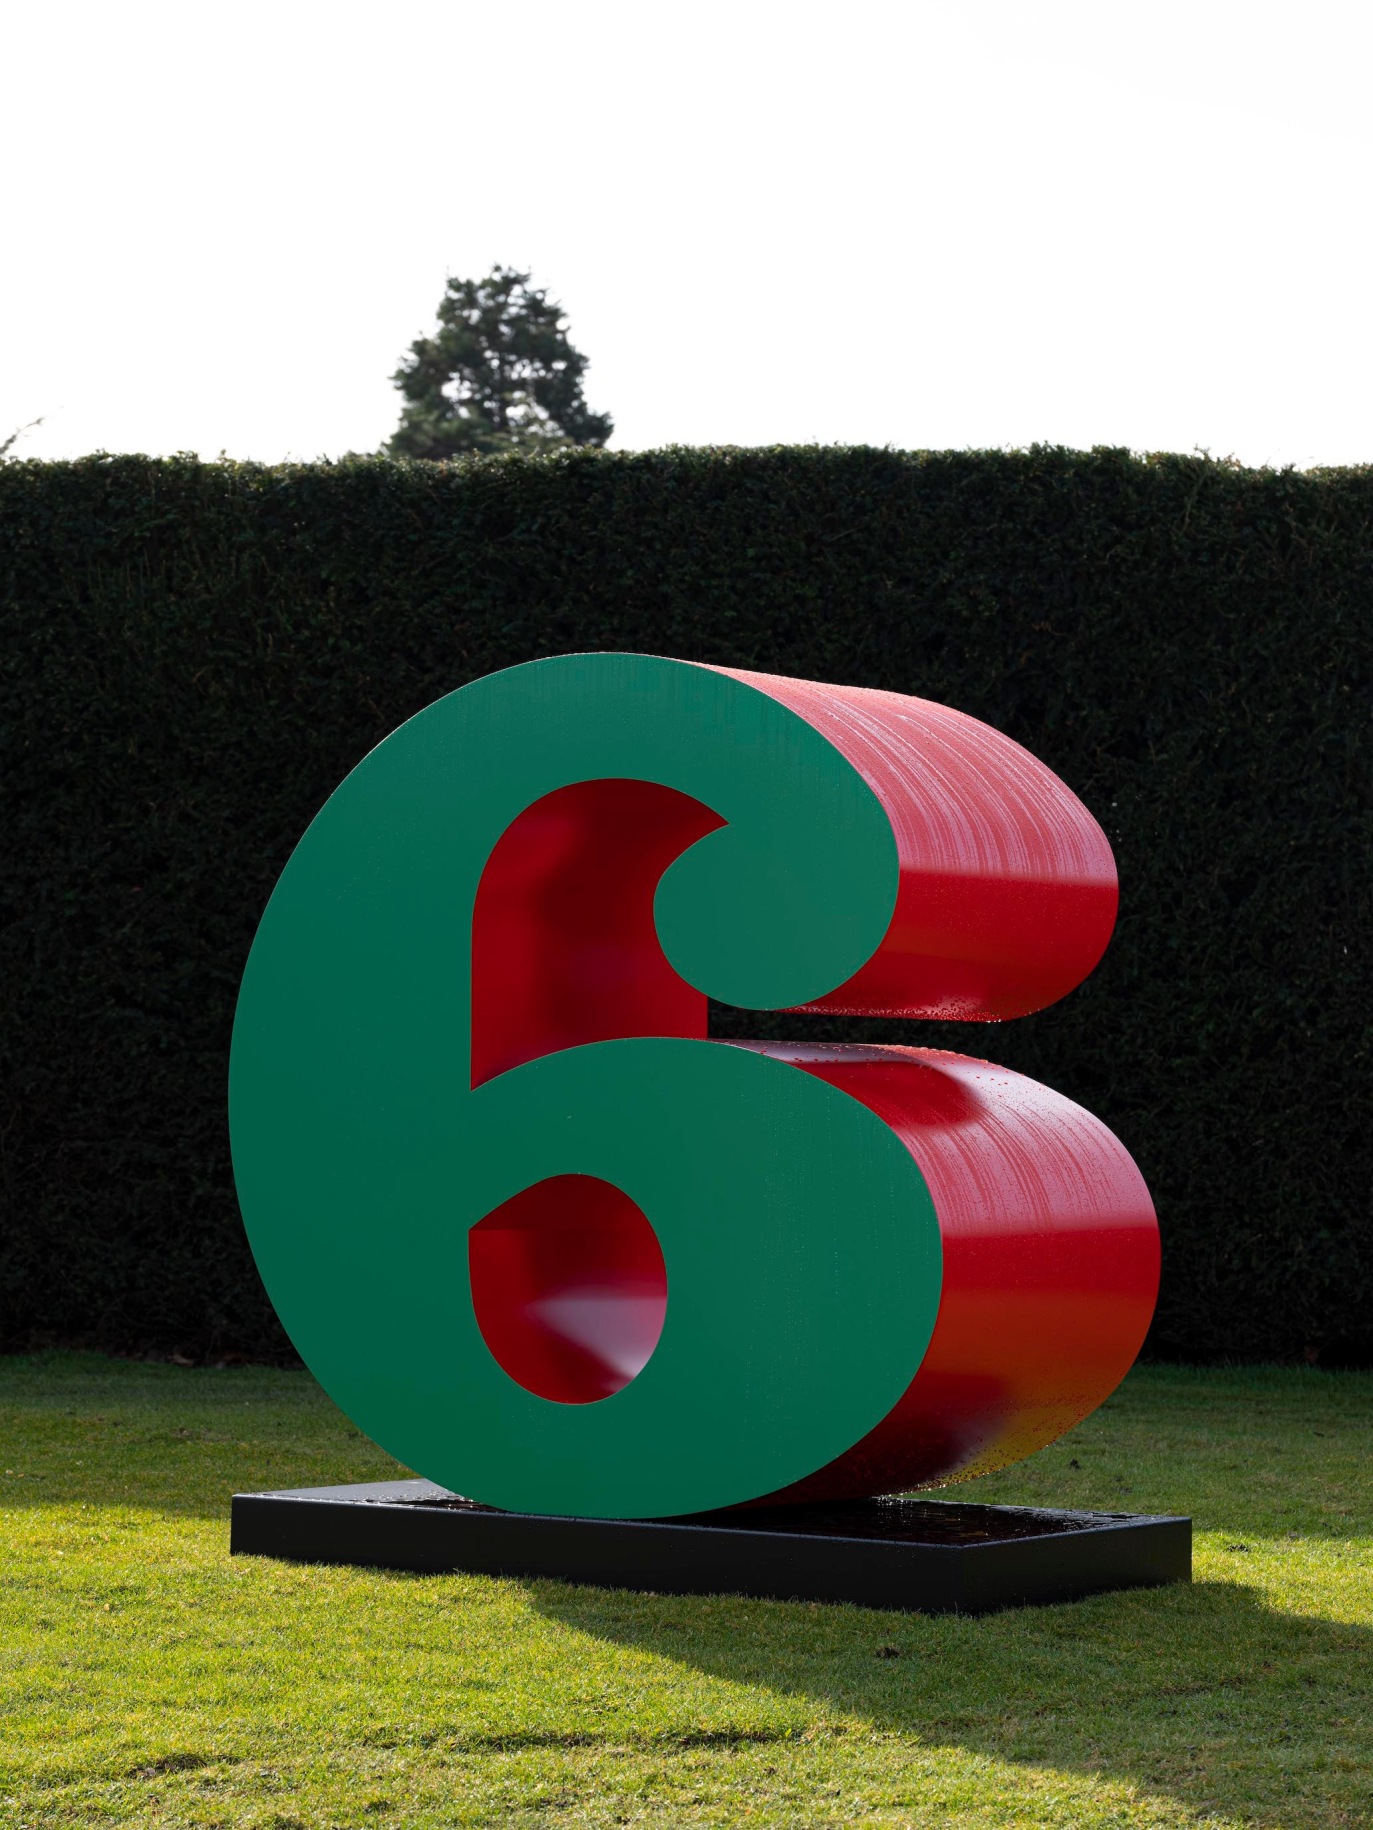 Installation view of Indiana's green and red polychrome aluminum sculpture of the number SIX at Yorkshire Sculpture Park